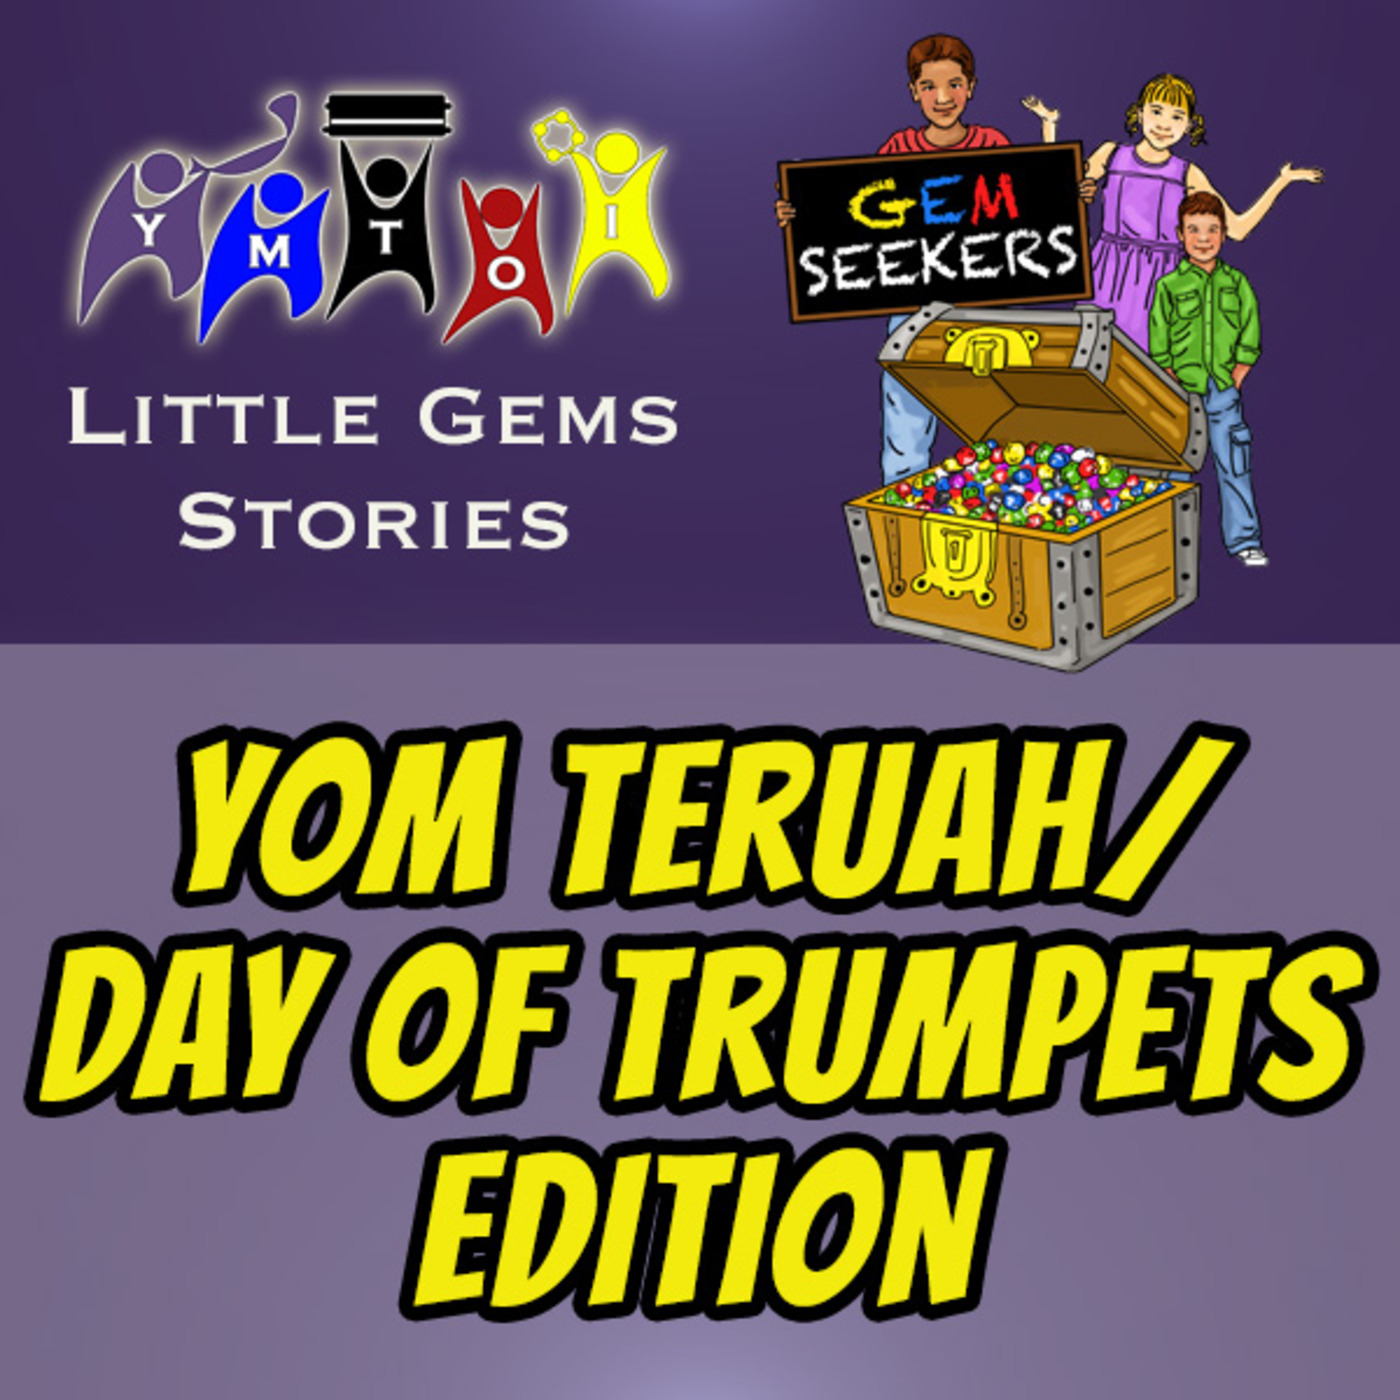 Episode 773: YMTOI Little Gems Story | Yom Teruah/Day of Trumpets Edition